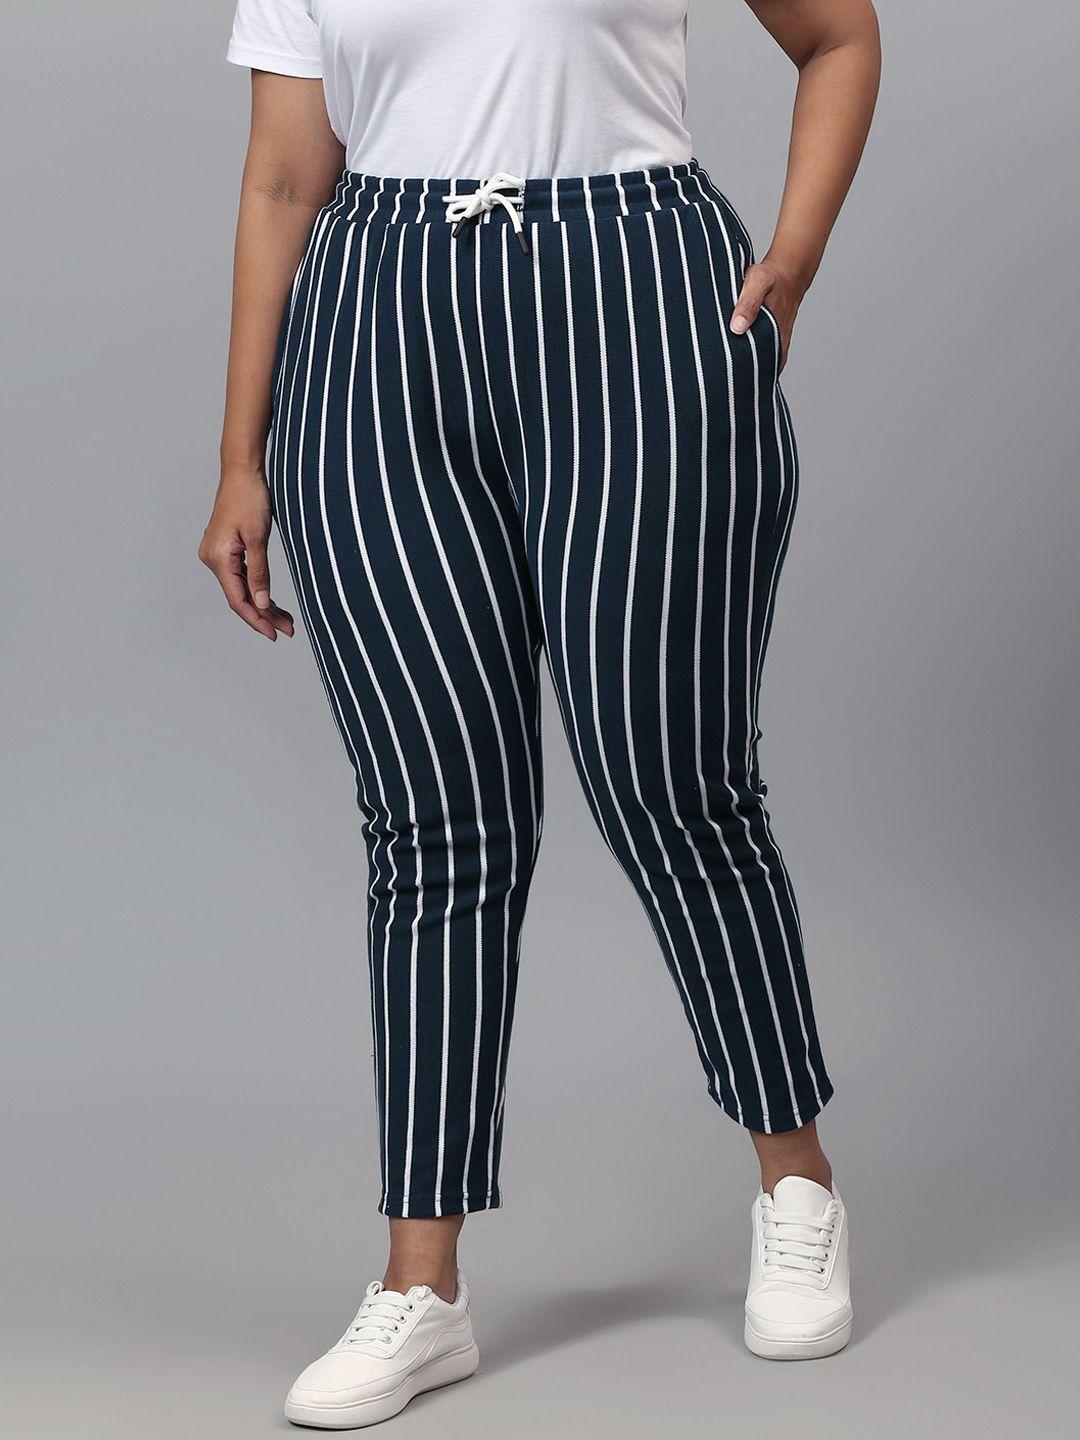 instafab plus women navy blue & white striped cotton relaxed-fit track pants